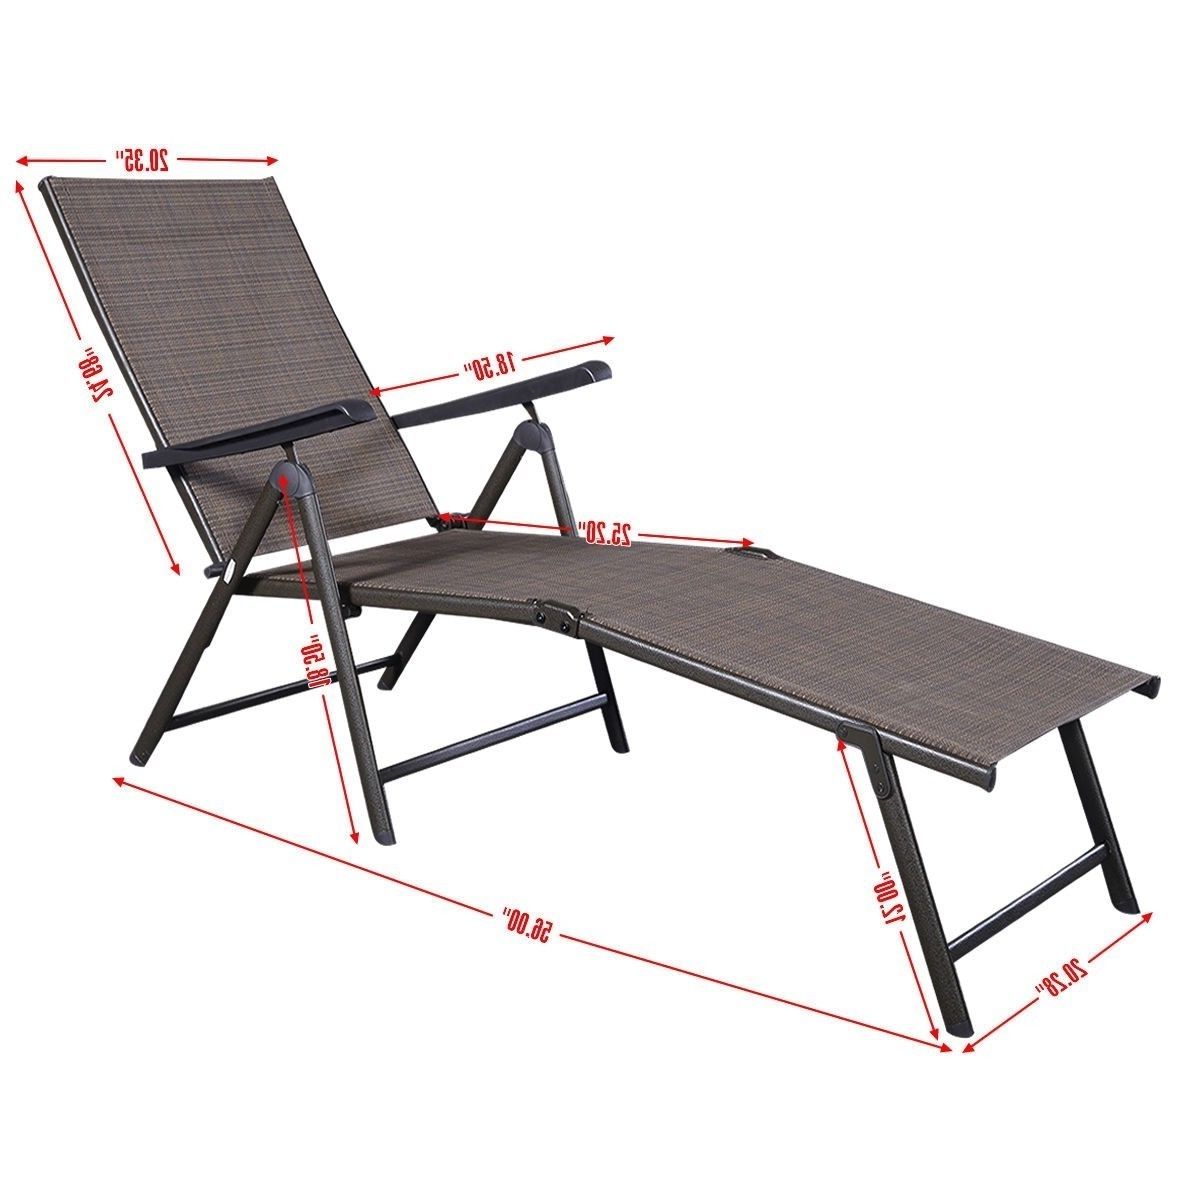 Newest Patio Furniture Textilene Adjustable Pool Chaise Lounge Chair Pertaining To Adjustable Pool Chaise Lounge Chair Recliners (View 12 of 15)